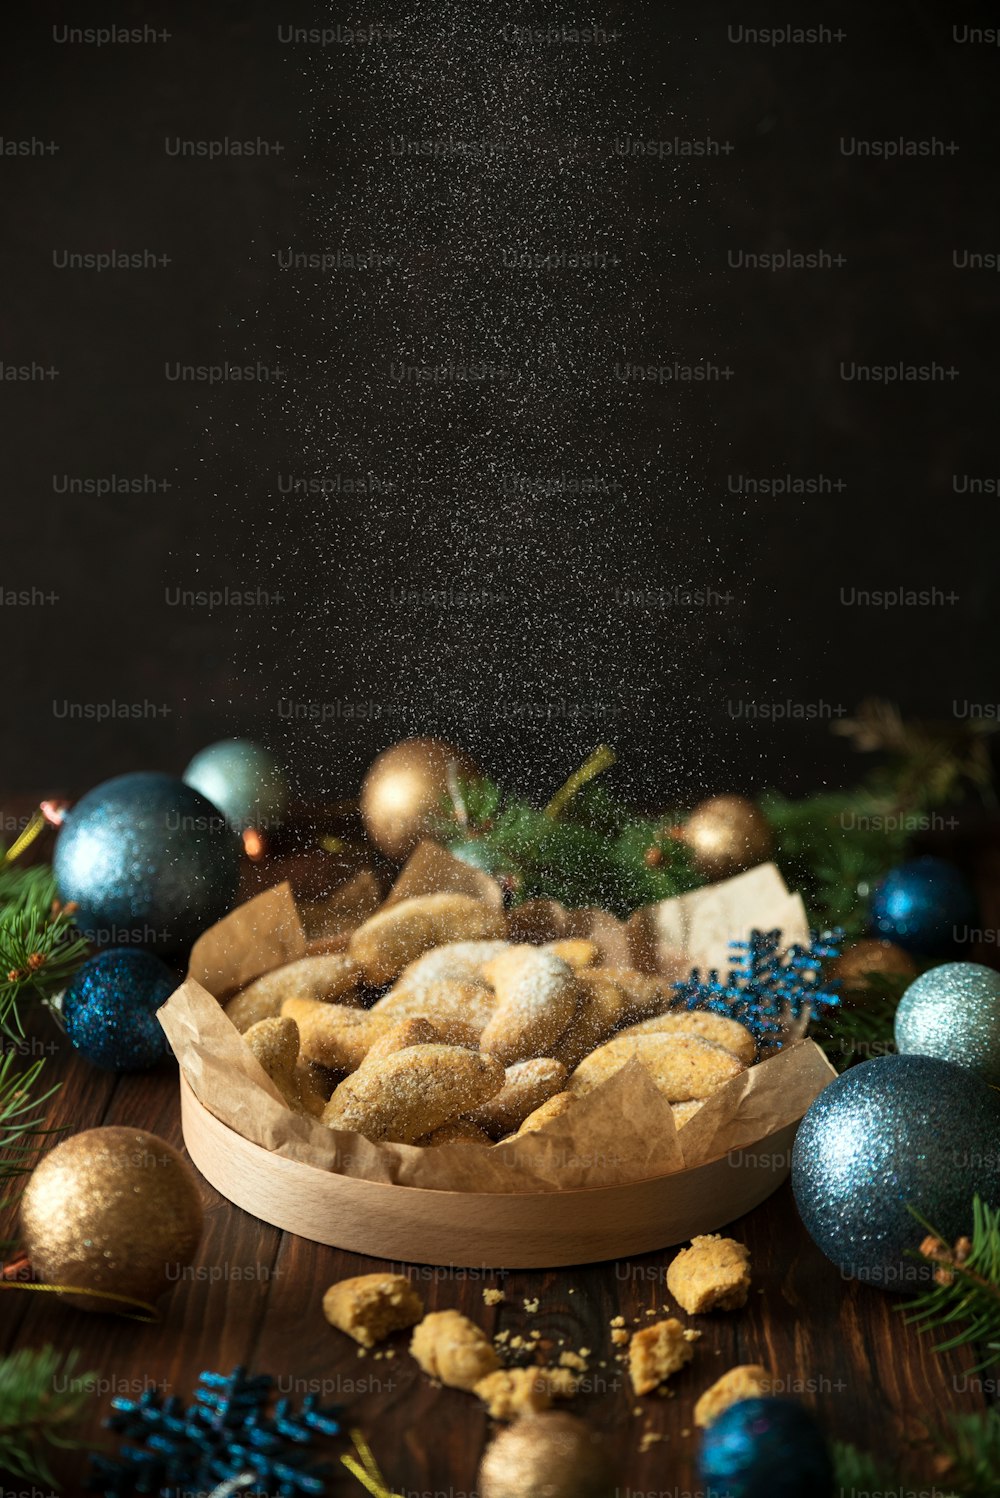 Homemade Christmas nuts cookies vanilla crescent with sugar powder in Christmas decorations. New Year and Christmas celebration concept. Copy space. Soft focus. Flying sugar powder